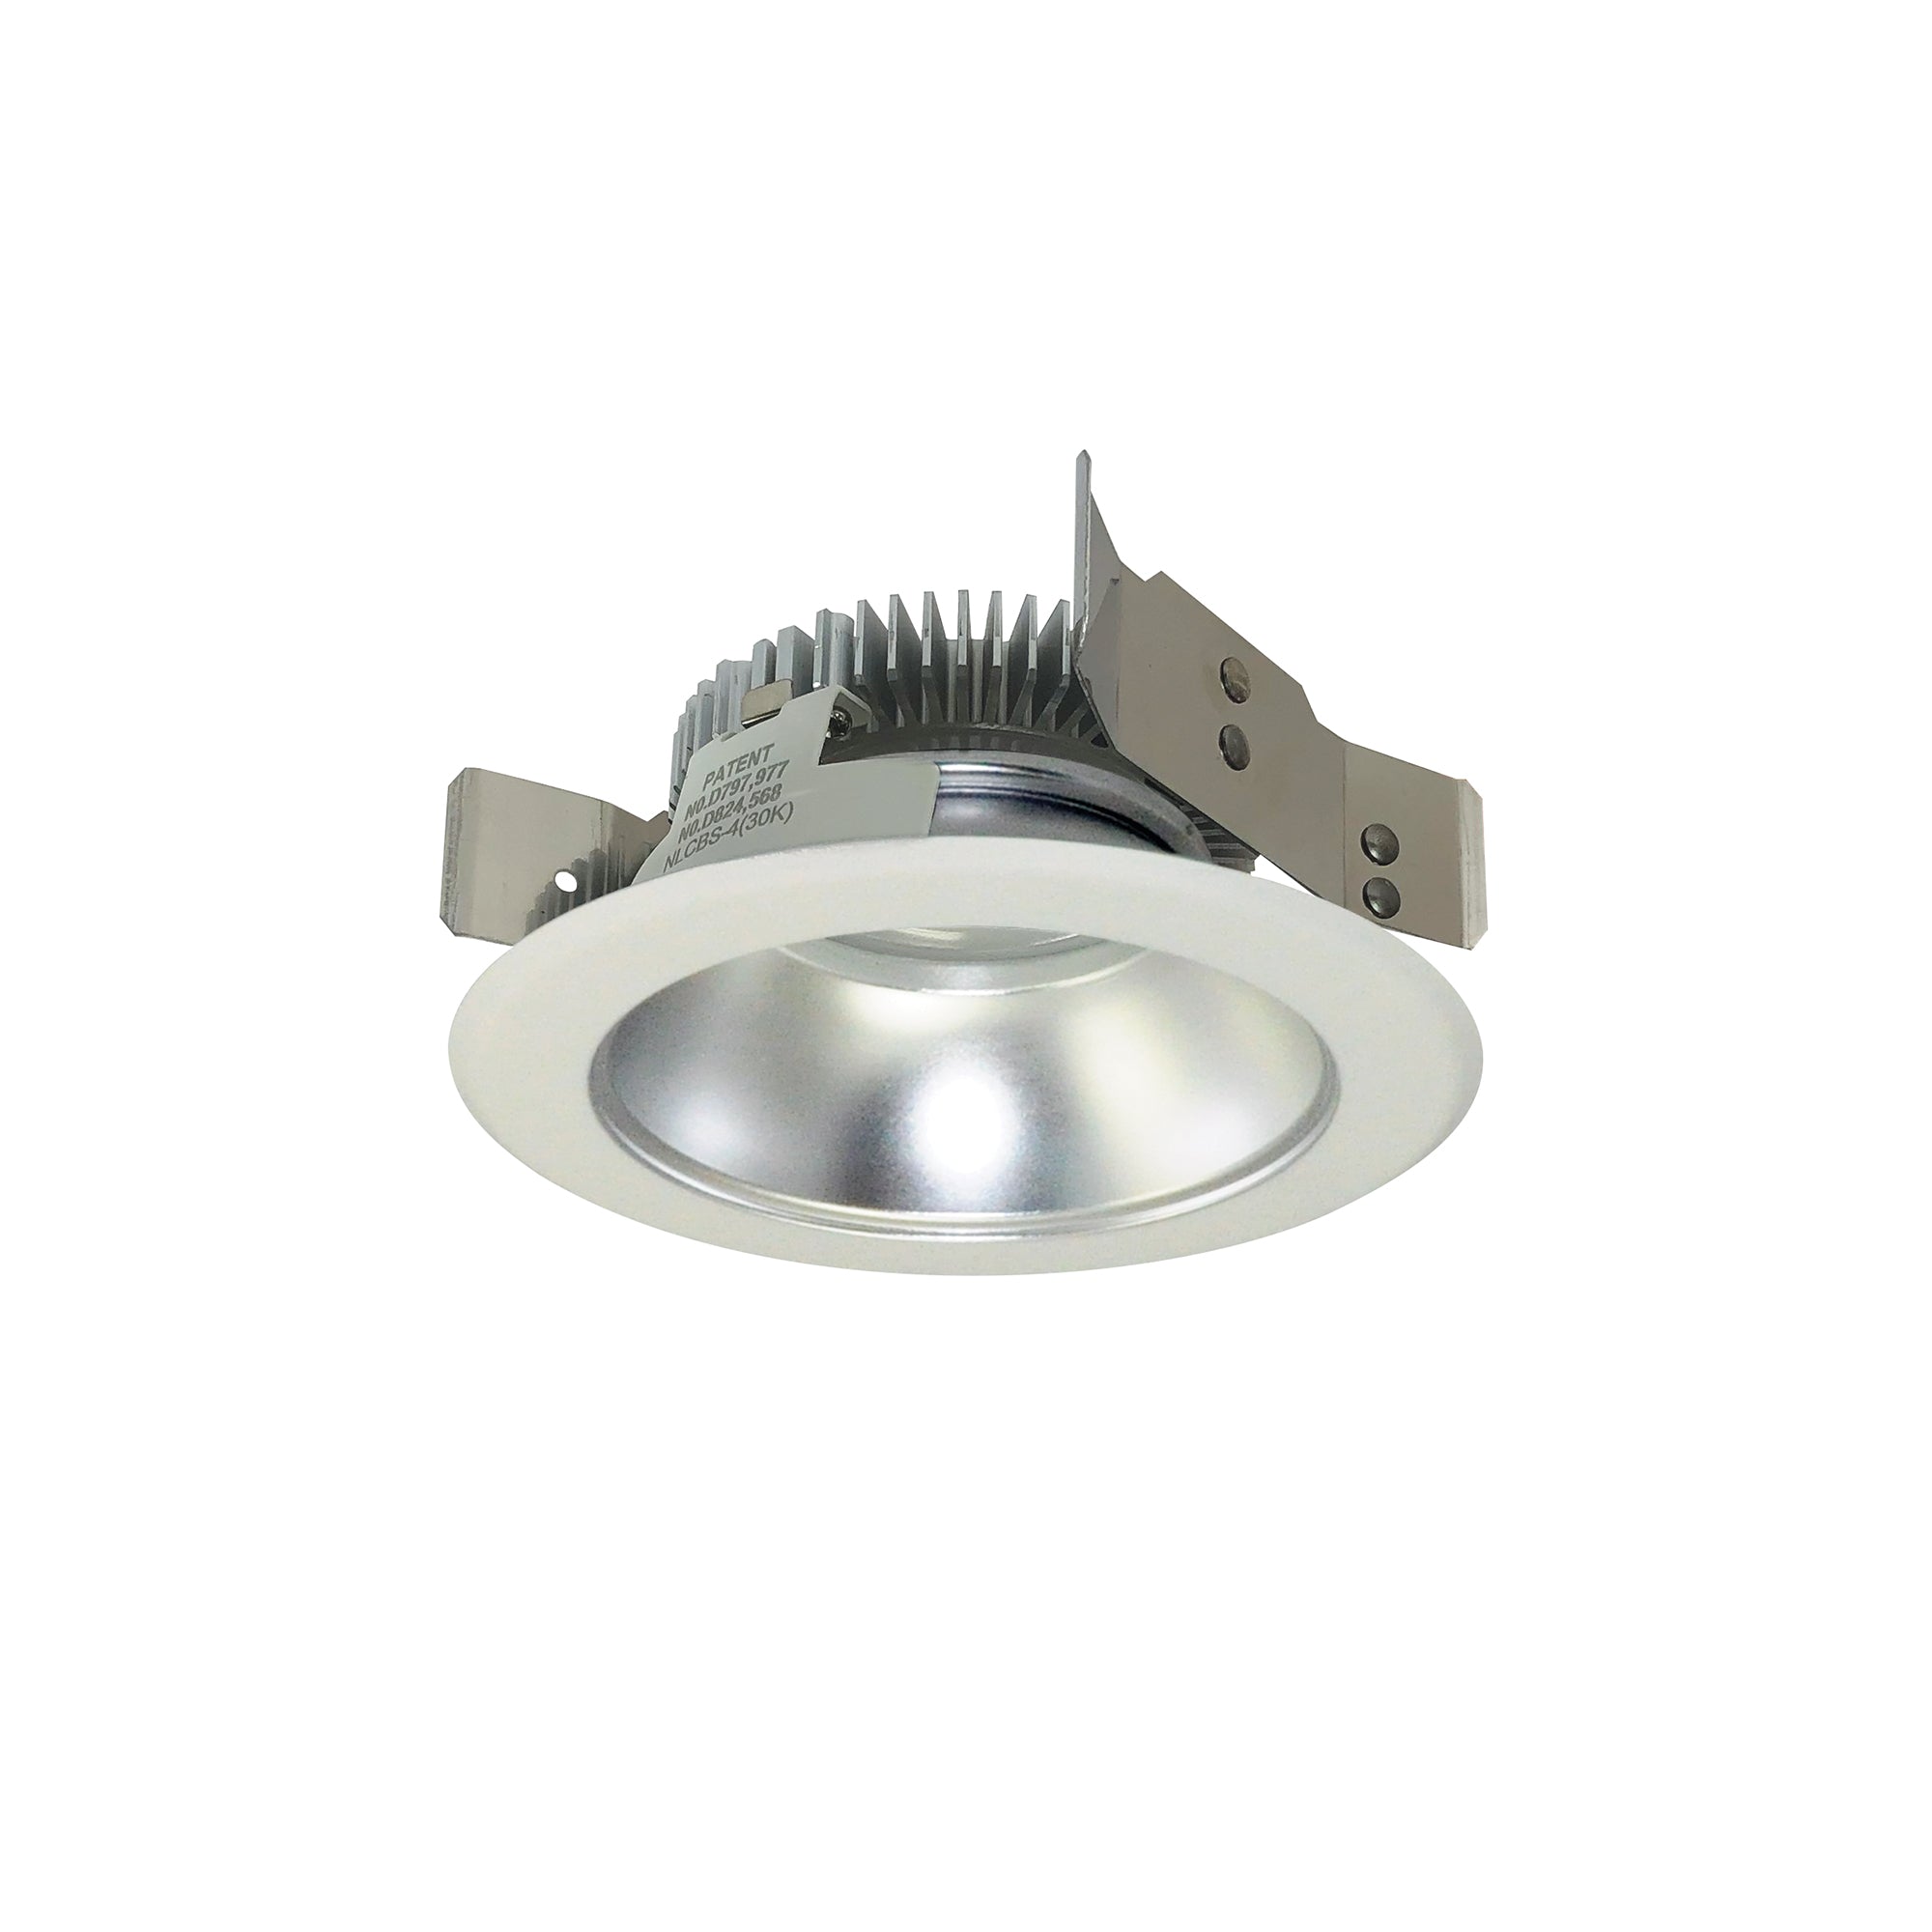 Nora Lighting NLCBS-4W511230DMPW - Recessed - 4 Inch Cobalt Shallow High Lumen LED Trim, Round Reflector, 1250lm, 3000K, Diffused/MPW